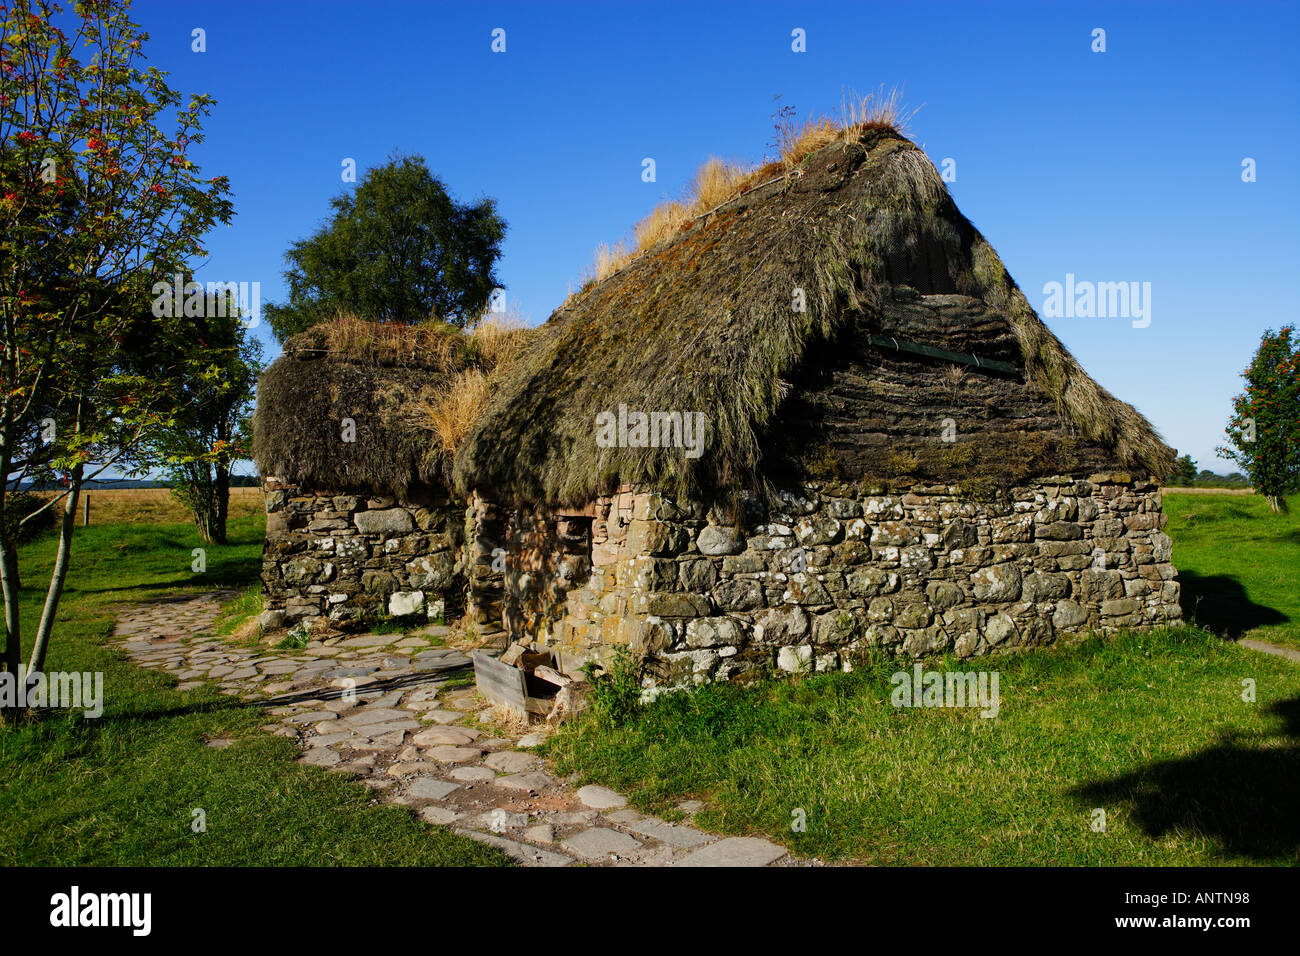 culloden battlefield traditional dwelling house reconstruction stone walls thatched roof Culloden Moor, Inverness, Scotland Stock Photo